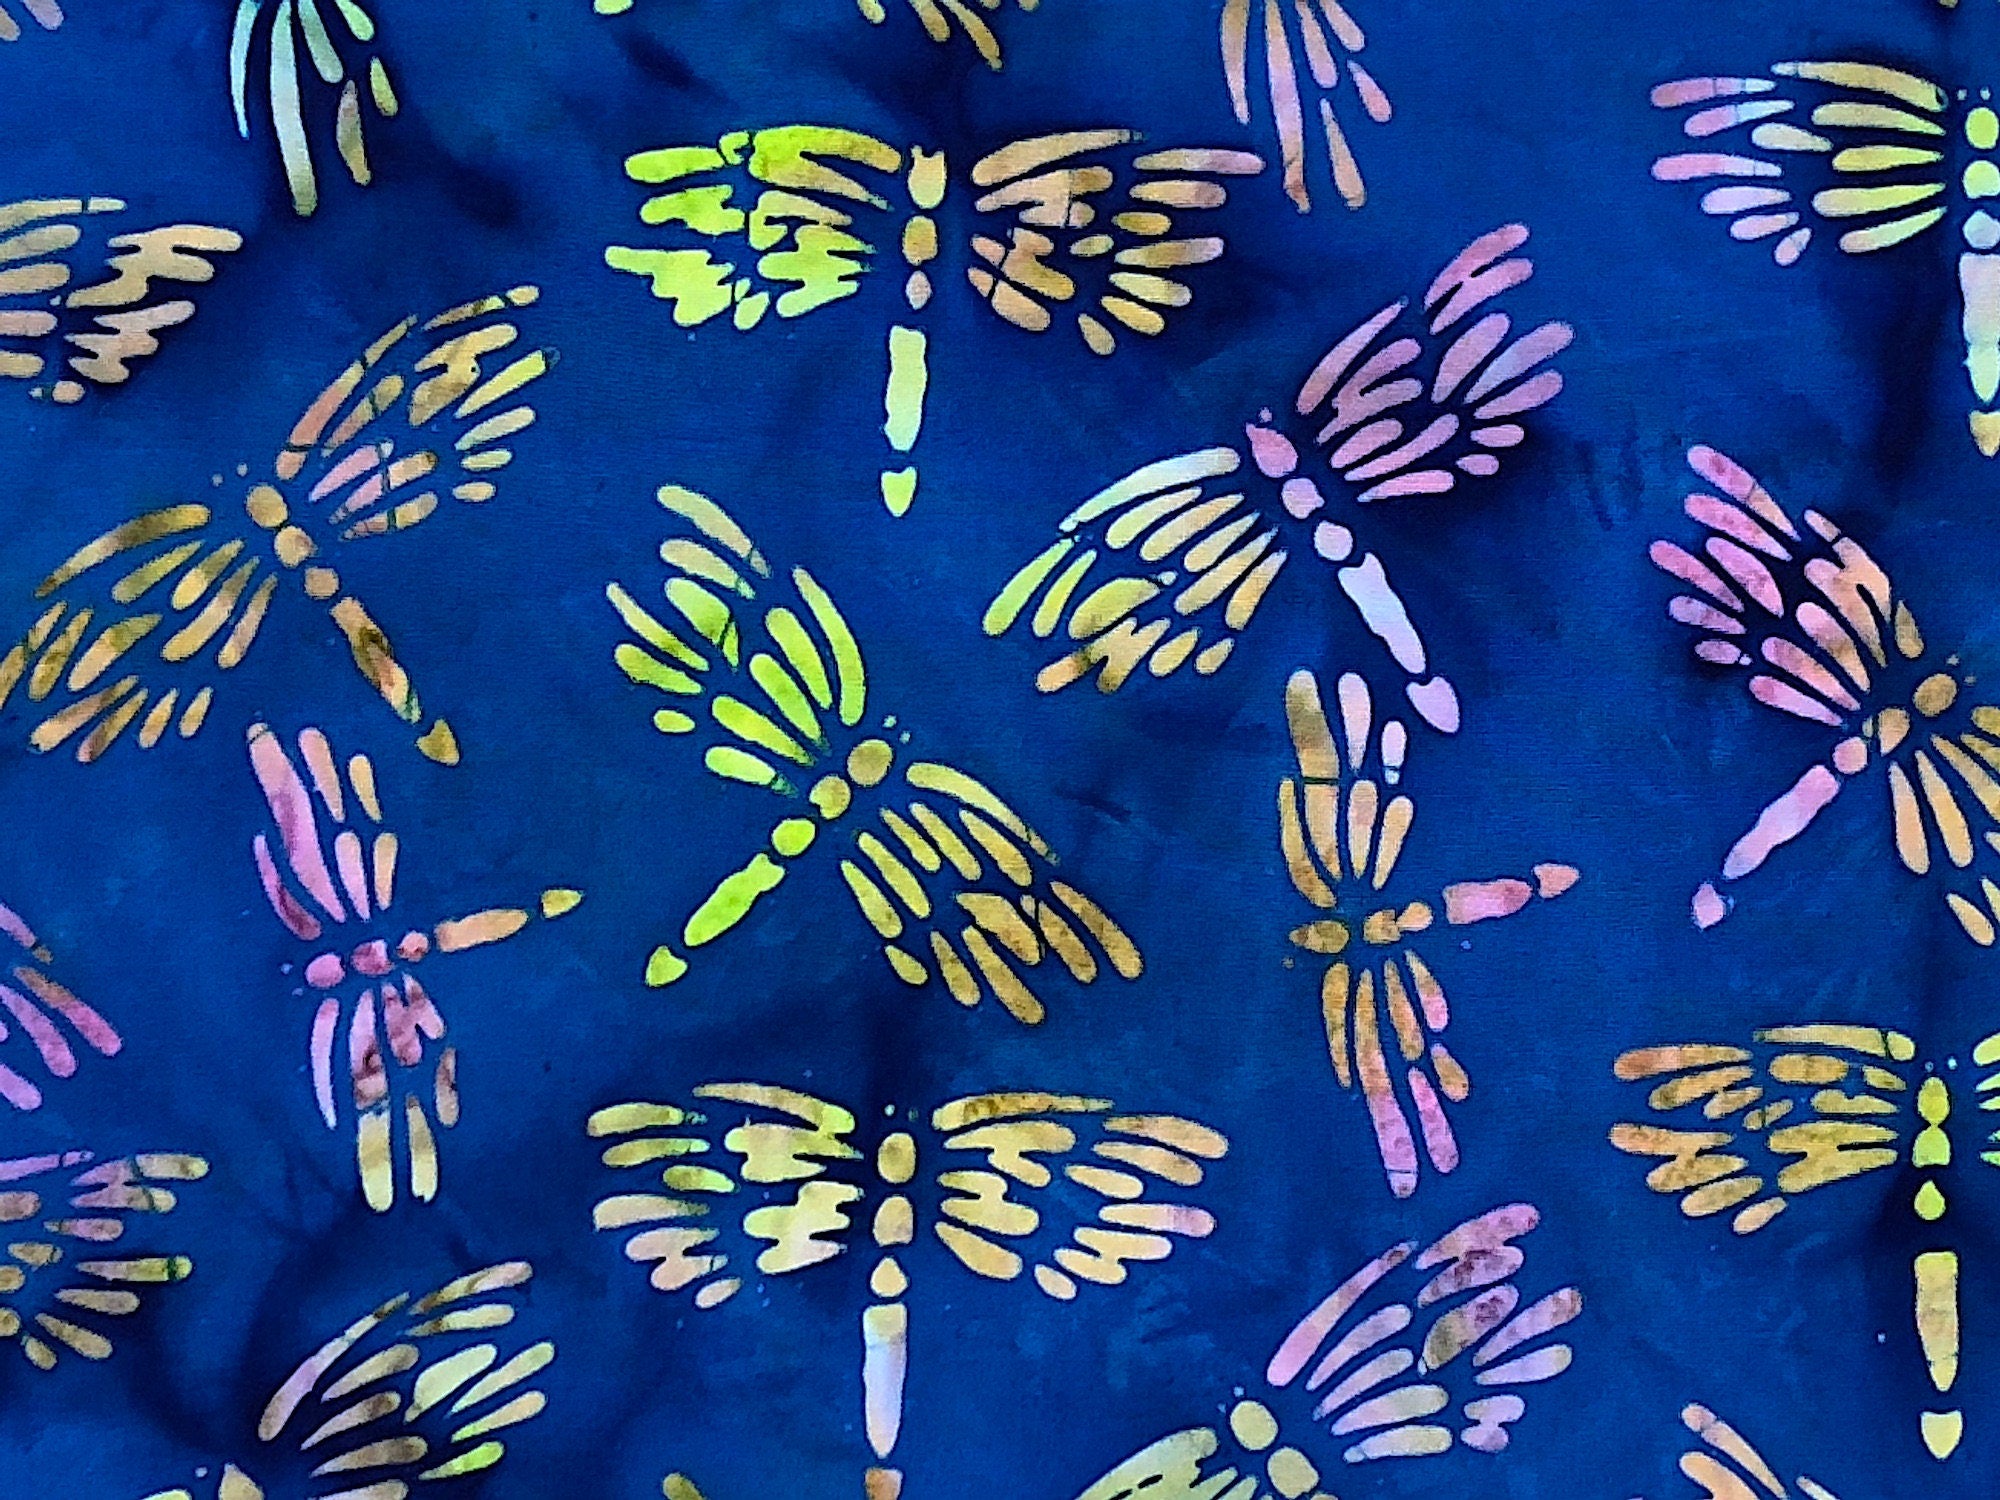 This dragonfly fabric is part of the lemon grass collection by Island Batik. The dragonflies are a combination of yellow, pink, blue and green. This fabric is called Dragonfly Royal Blue